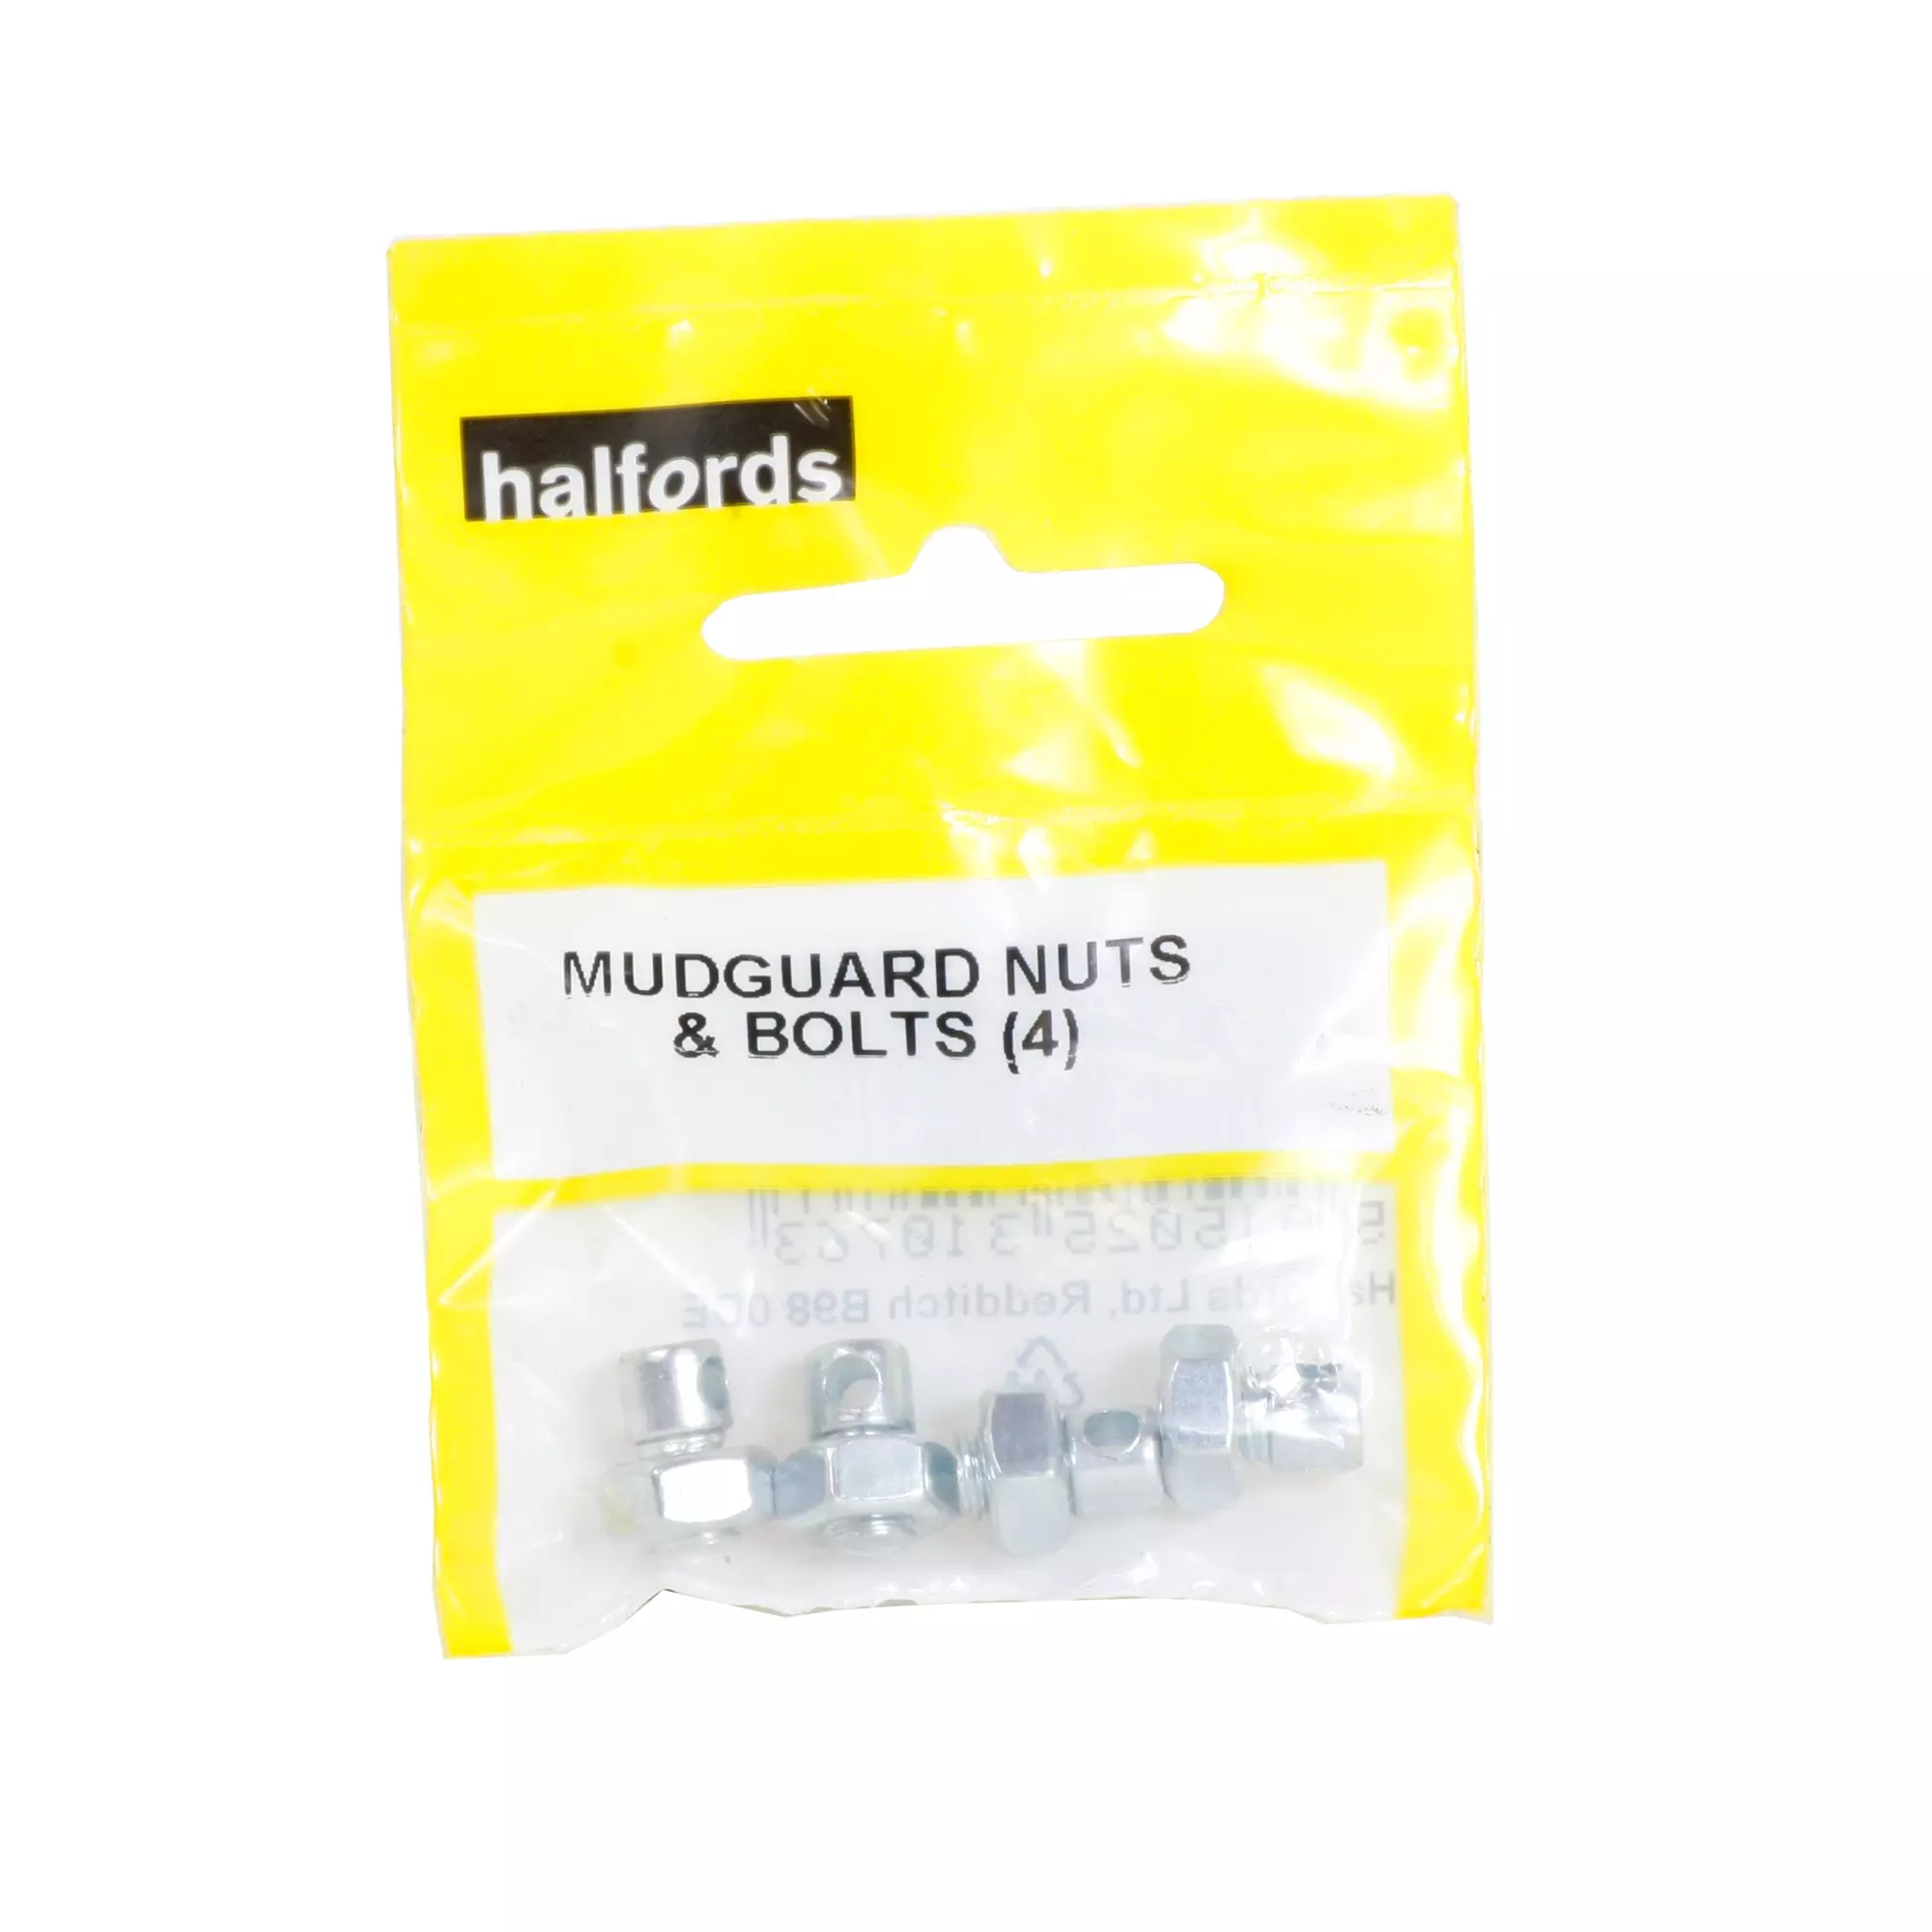 halfords mudguards fitting